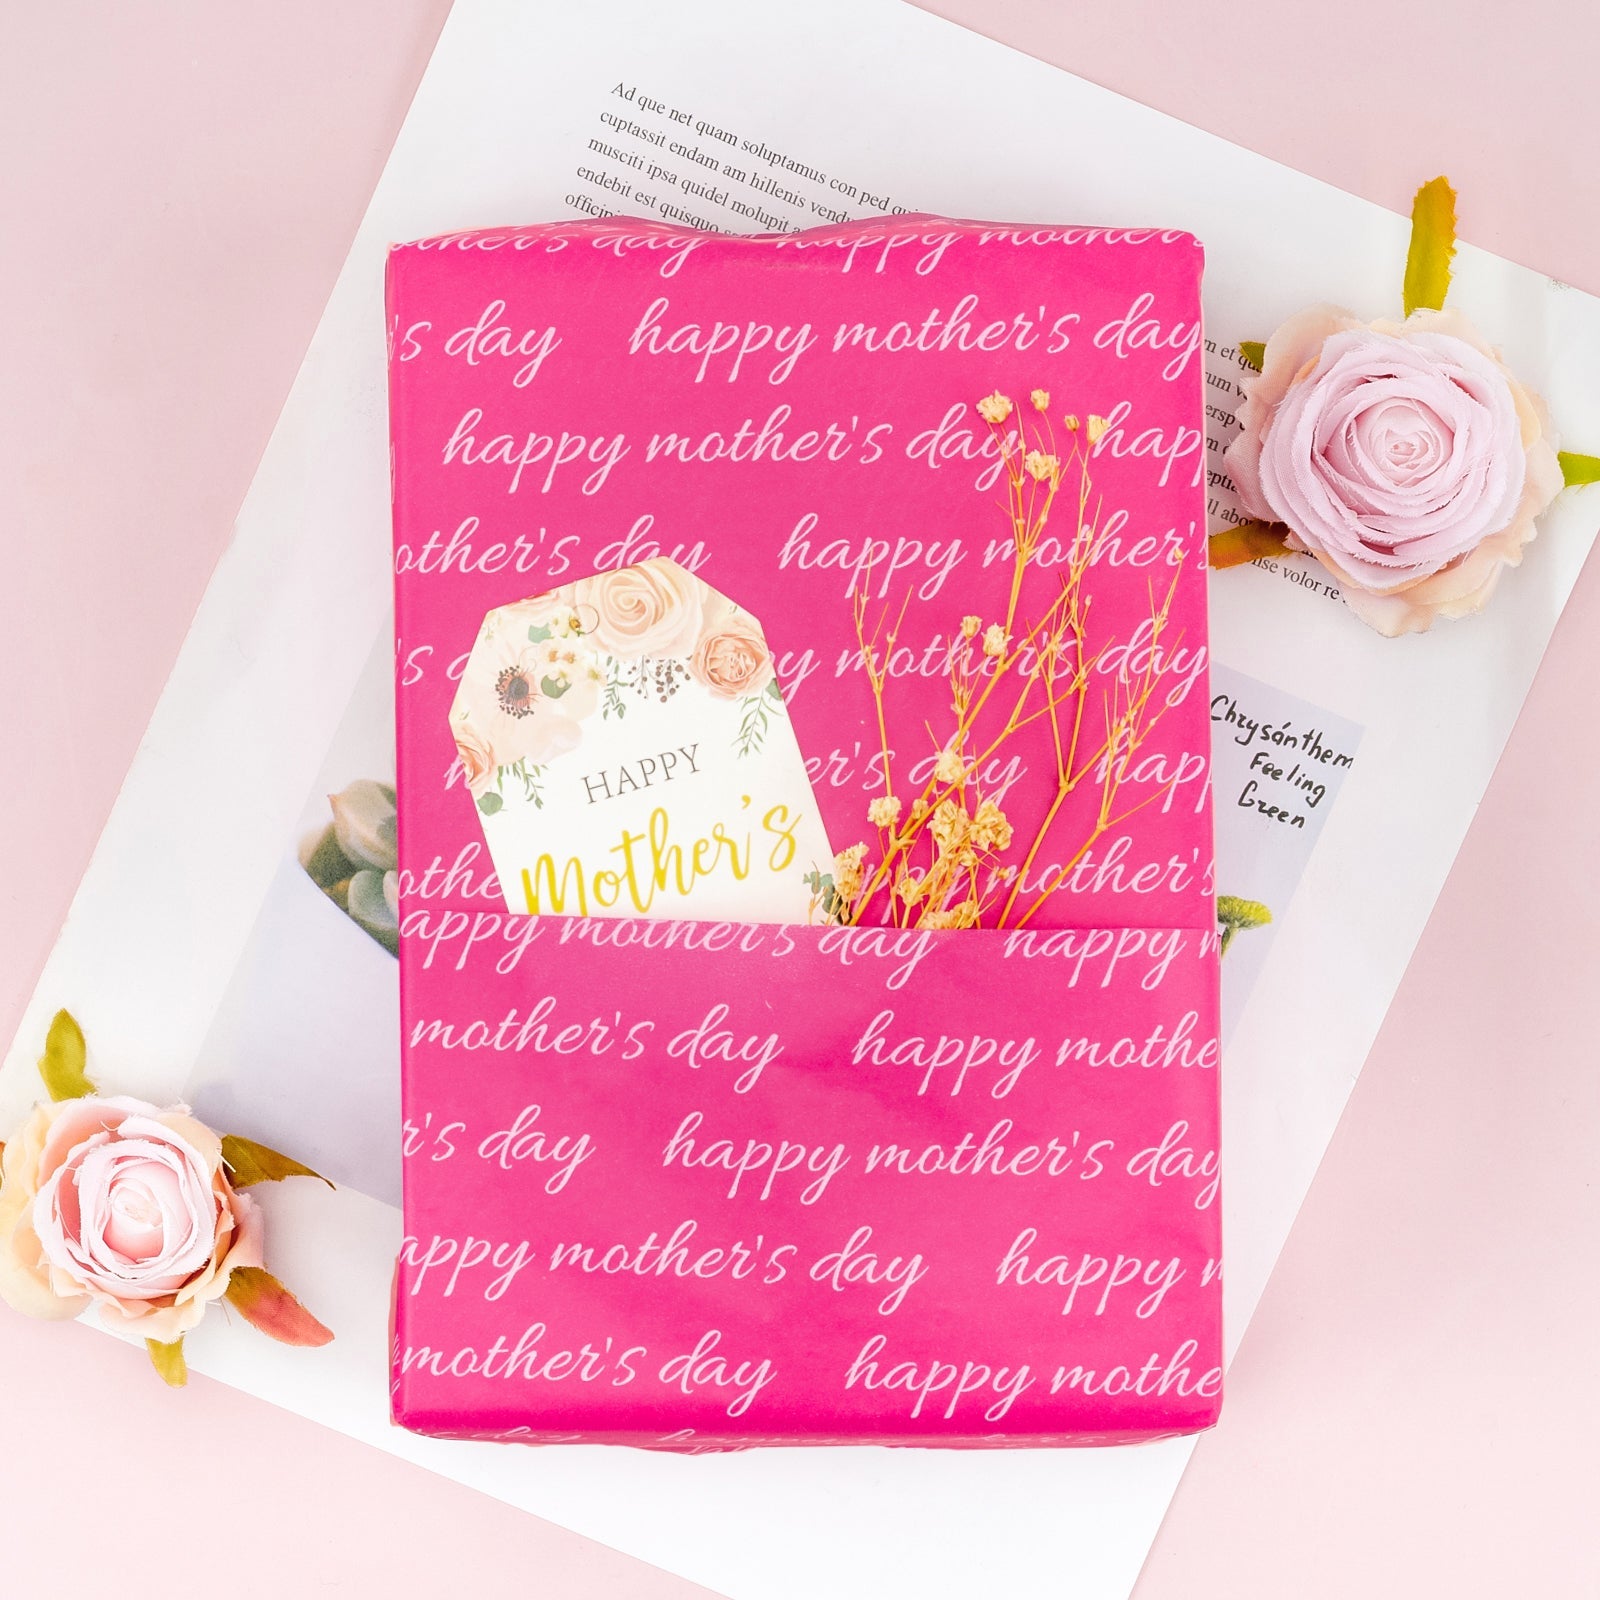 Gift Wrapping Tissue Paper - 25 Sheets Pink and White Happy Mother's Day Design Gift Wrap Paper Bulk for Packing, DIY Crafts - 19.7x27.5 inch